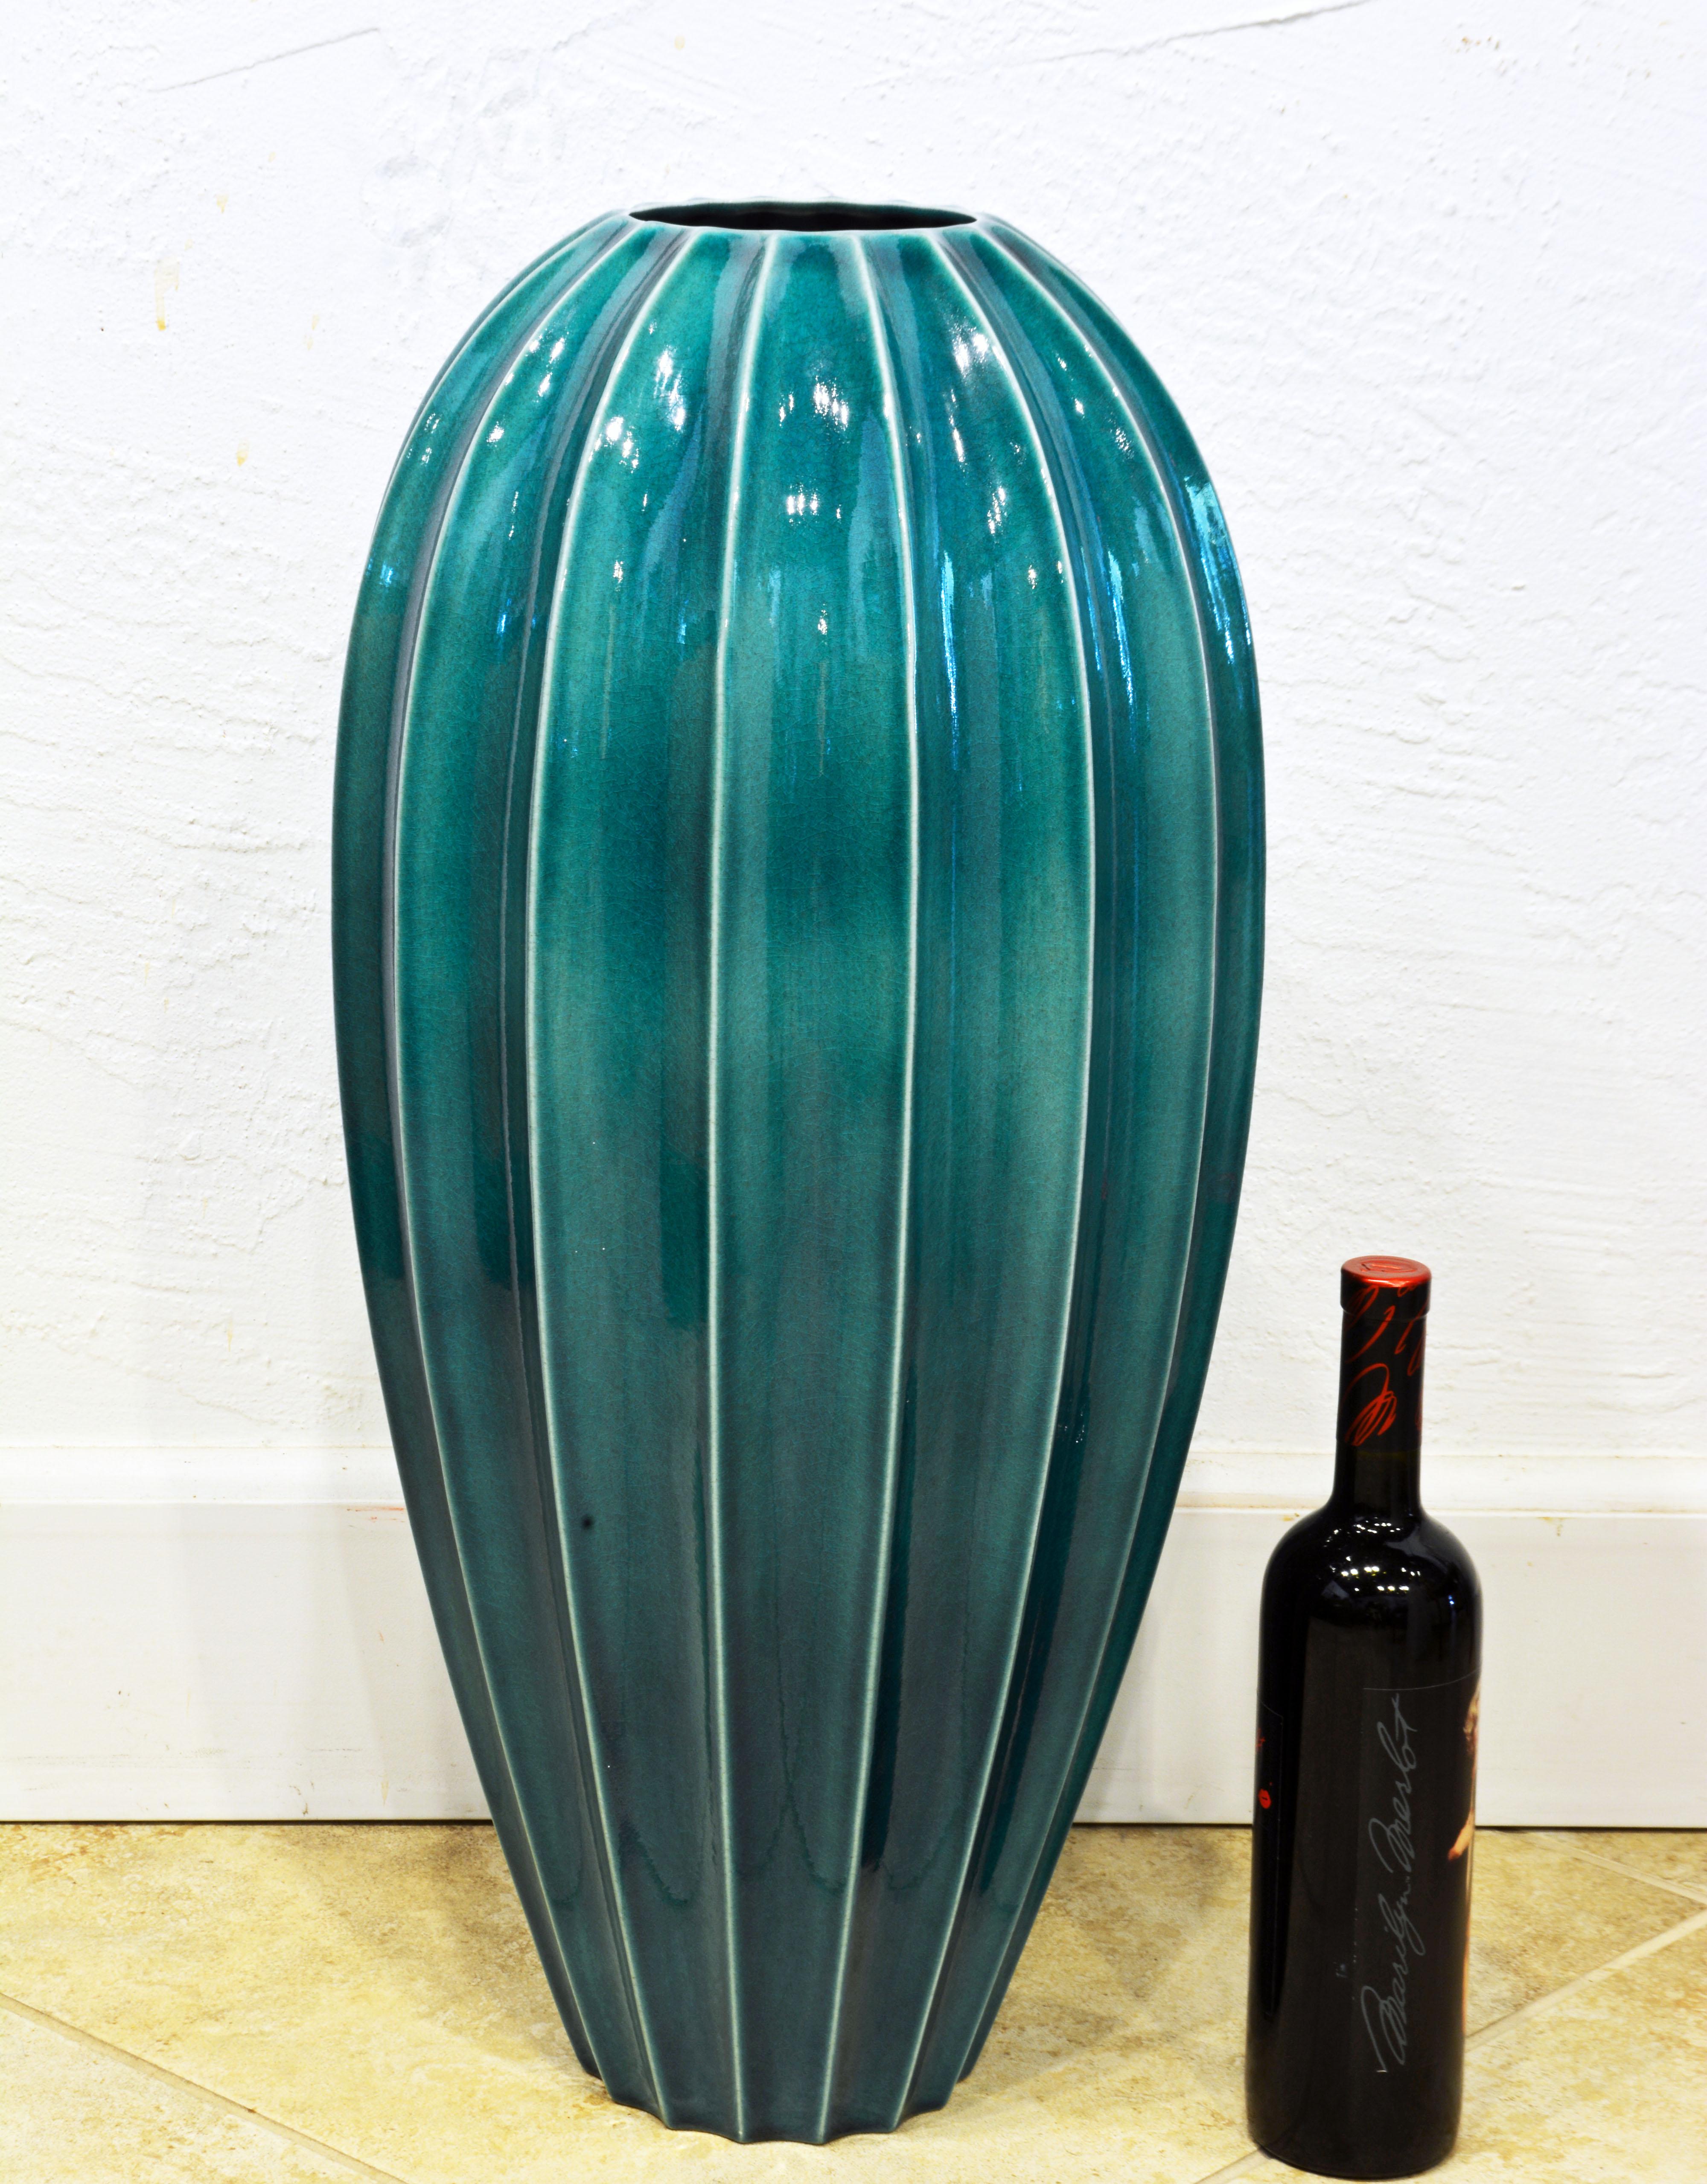 Standing 26 inches tall this Oggetti floor vase is the epitome of timeless design. The color of the glaze fluctuates between malachite green and turquoise divided by the light cream edges of the ribs. The vase is great on the floor but its